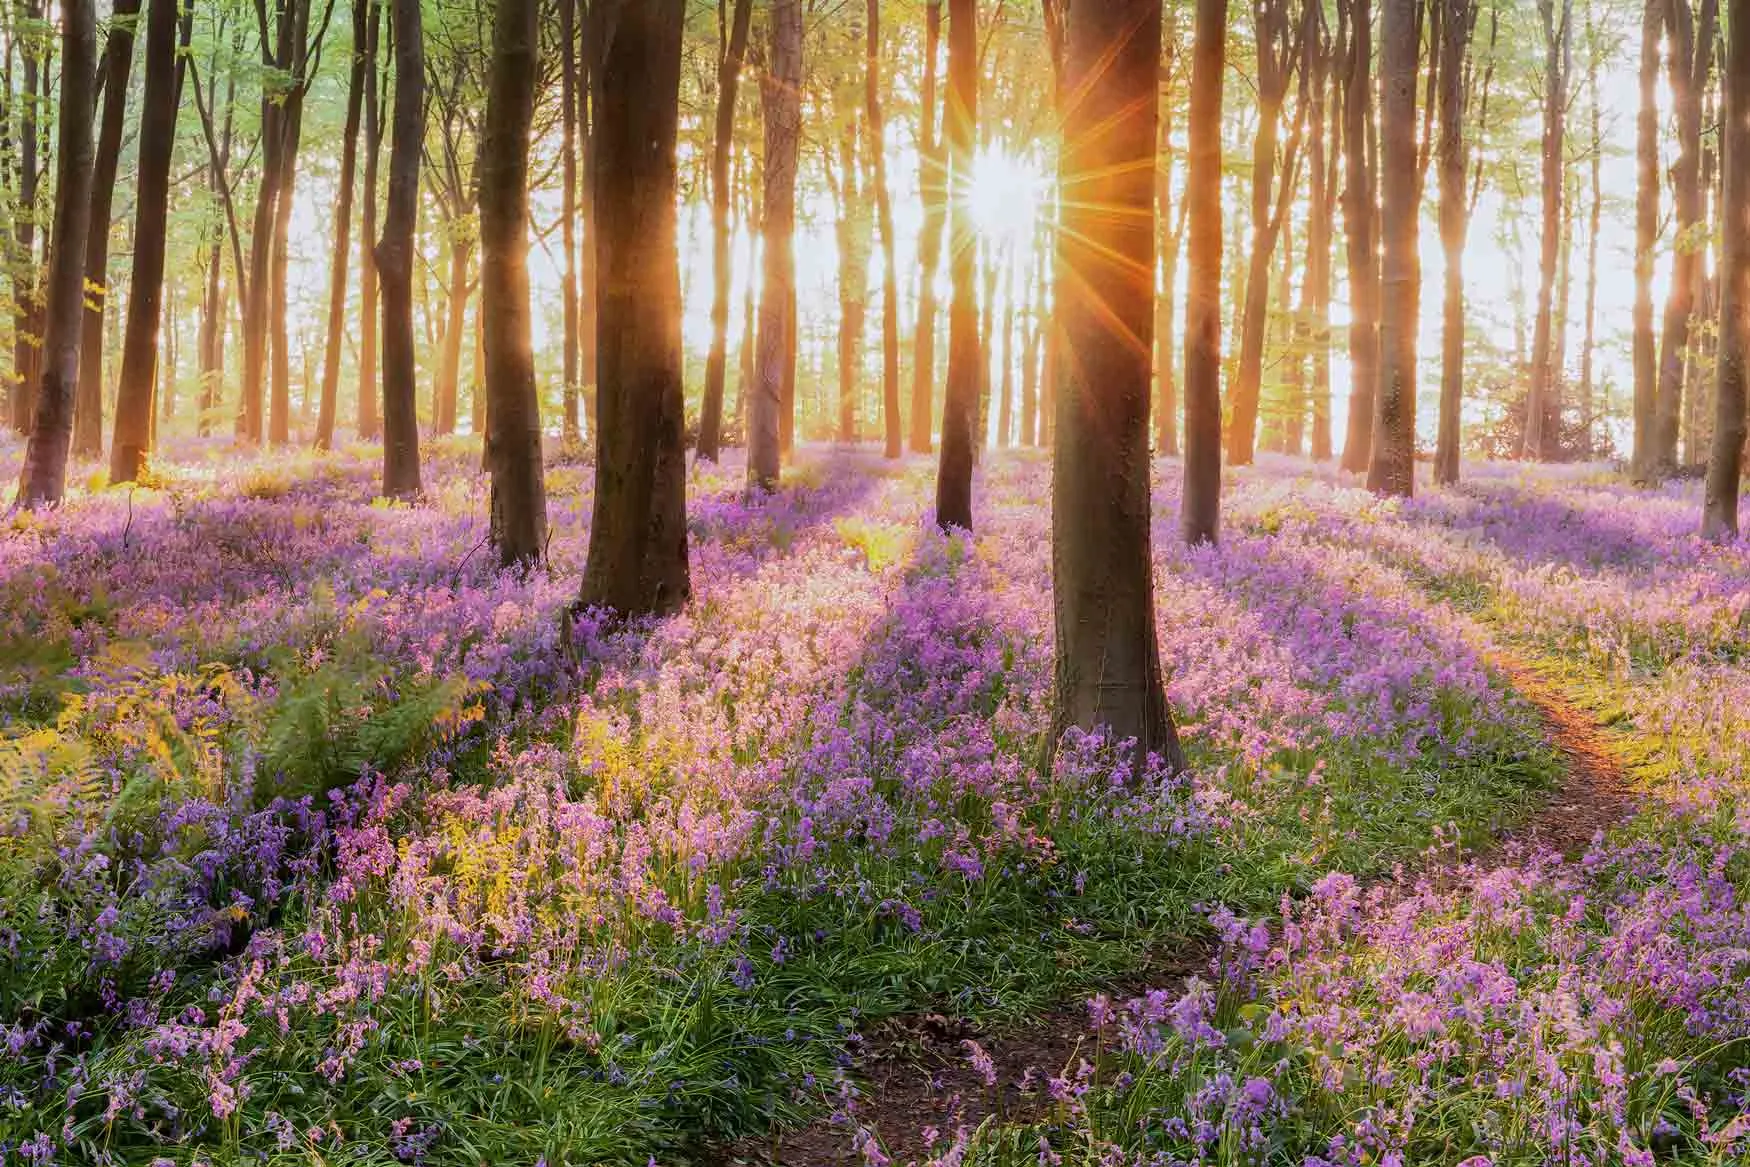 Low, golden sun rays stretching through the woodland, illuminating a mass of Bluebells on the woodland floor.